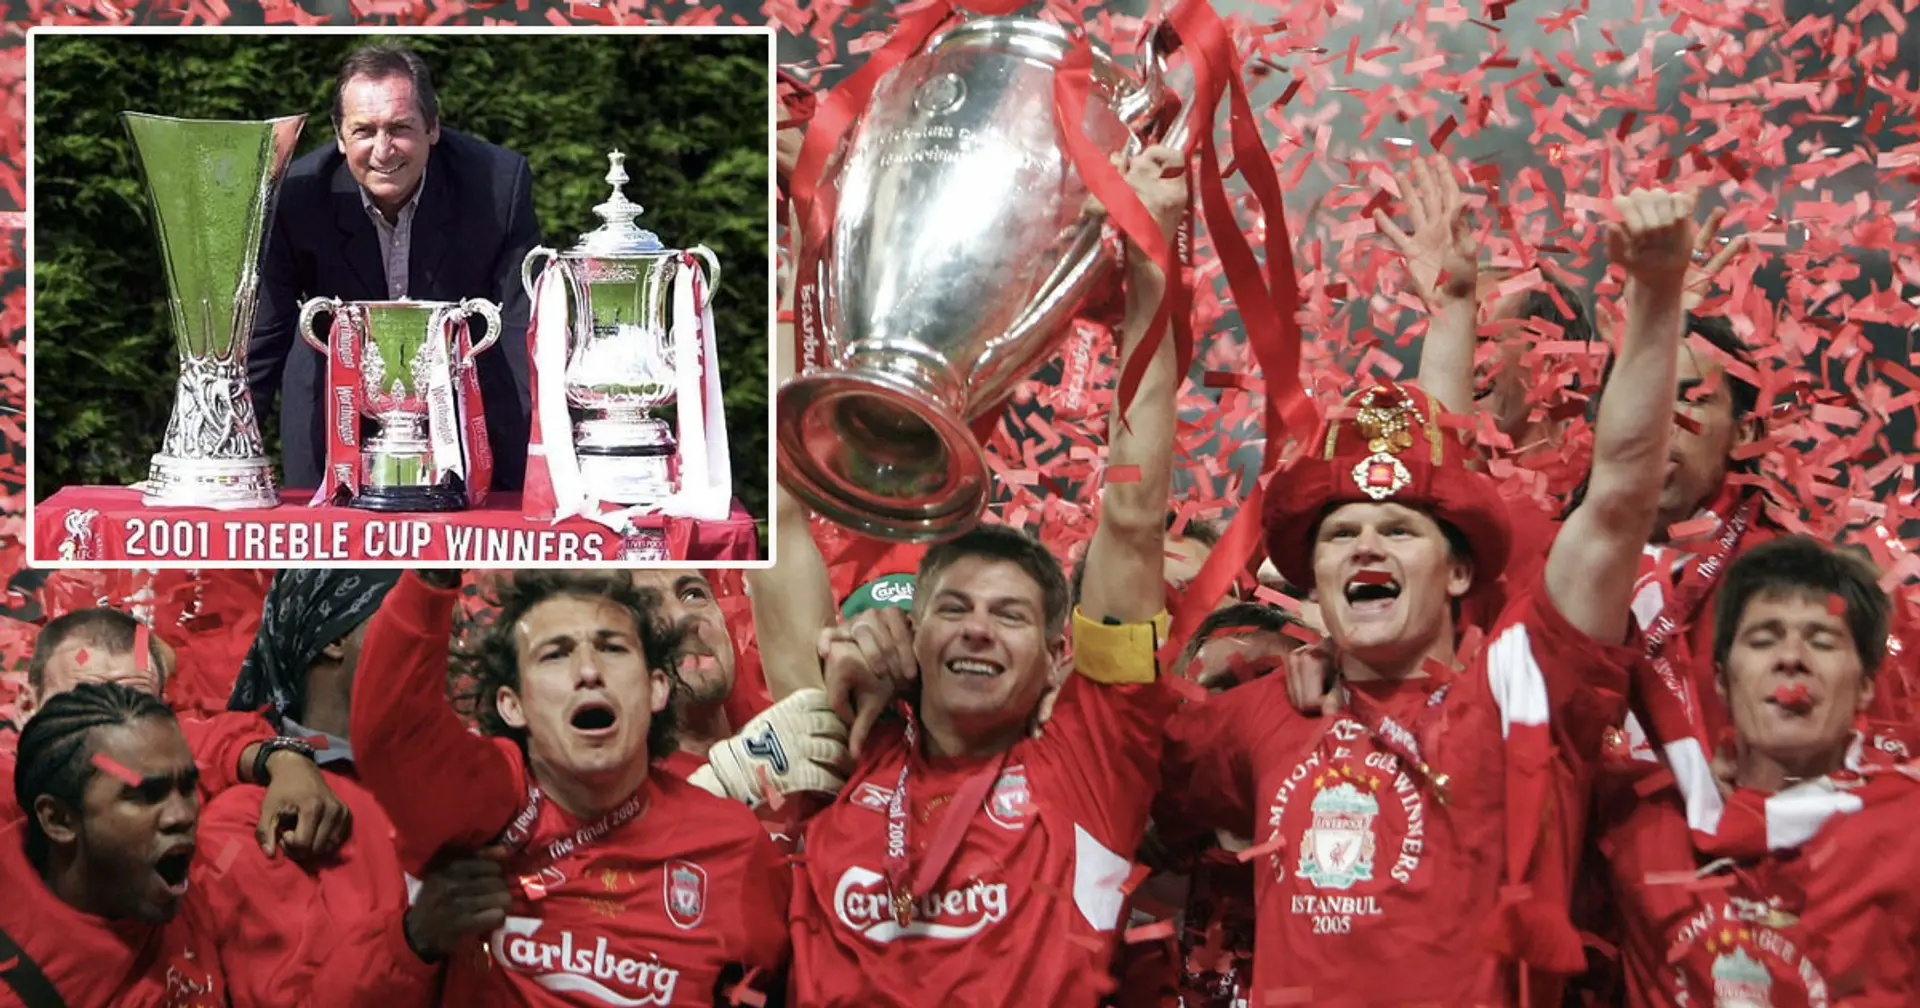 'Before, they'd lose to Strasbourg': How one Houllier's feat propelled Liverpool to Miracle of Istanbul